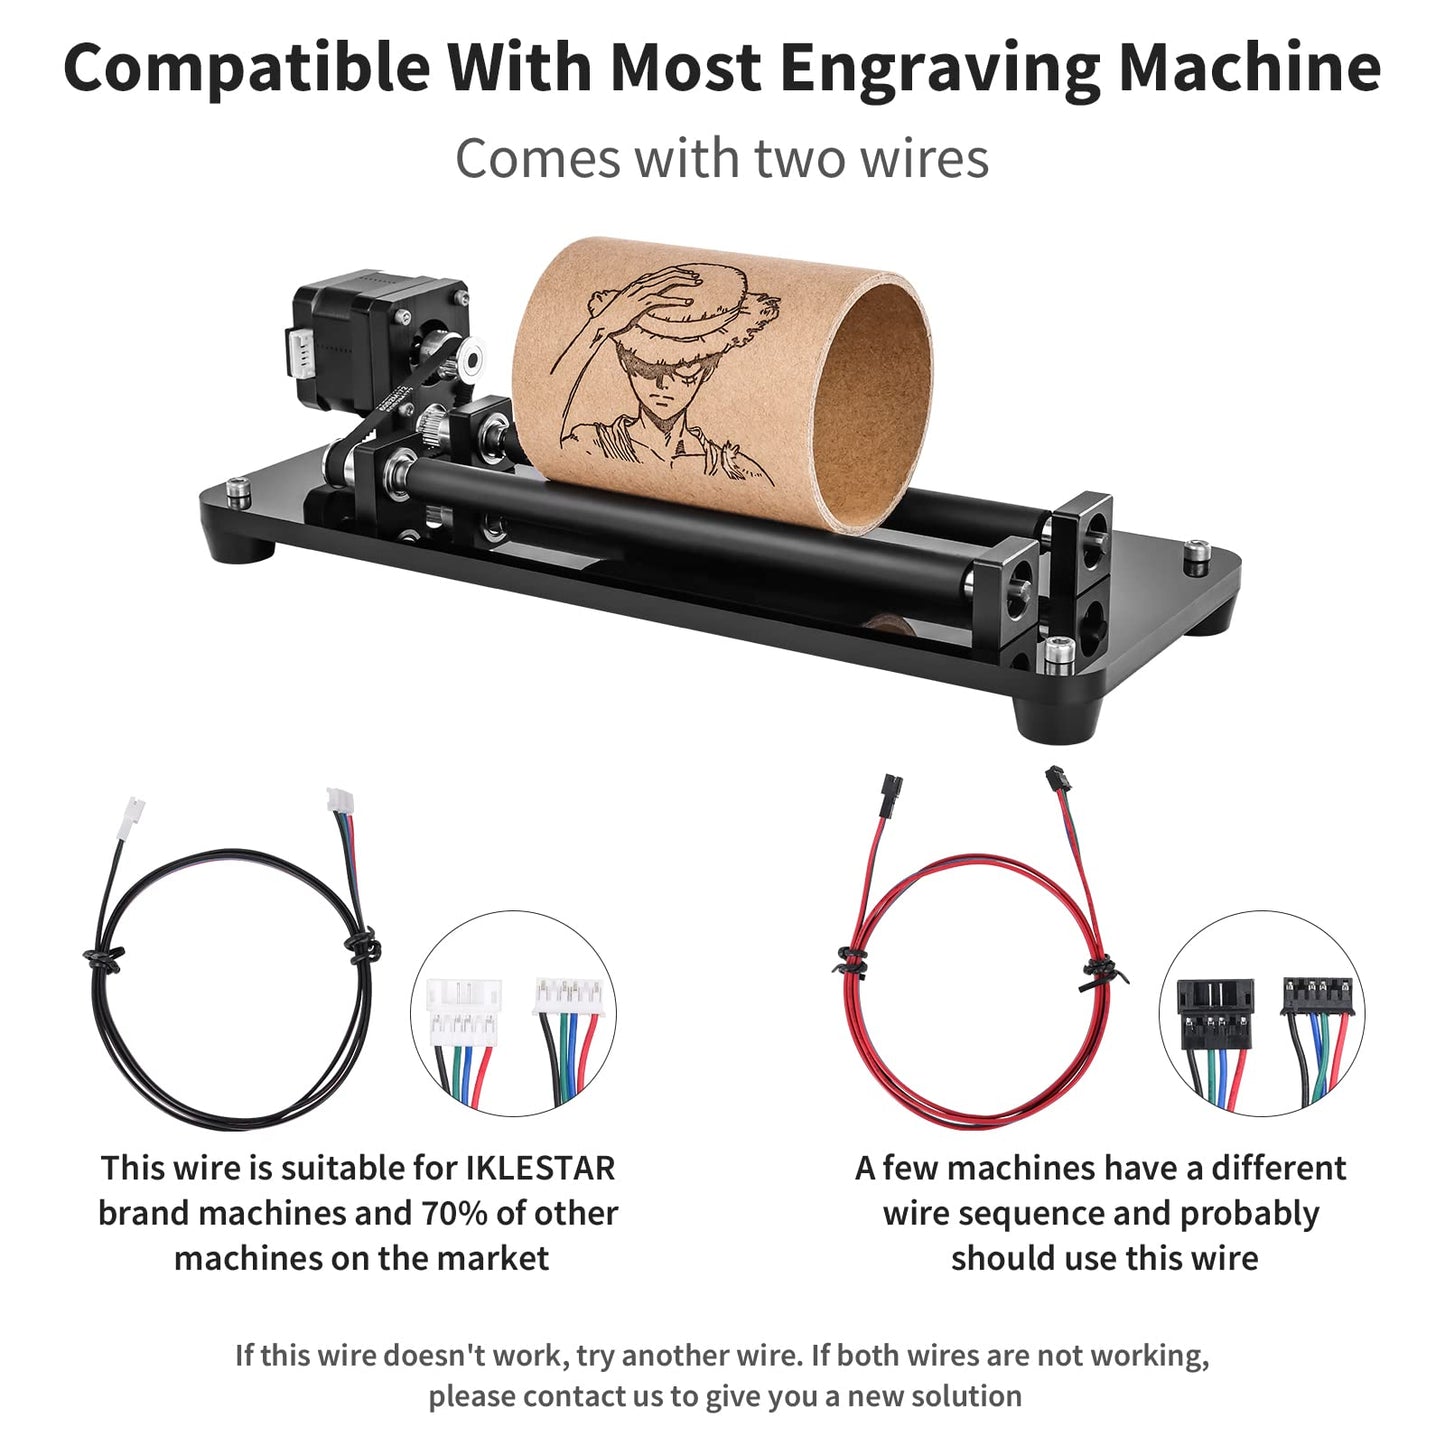 Laser Rotary Attachment for Laser Engraver, CNC Rotary Axis for 360°Engraving Cylindrical Object, Diameter Adjustable, Compatible with CNC Router